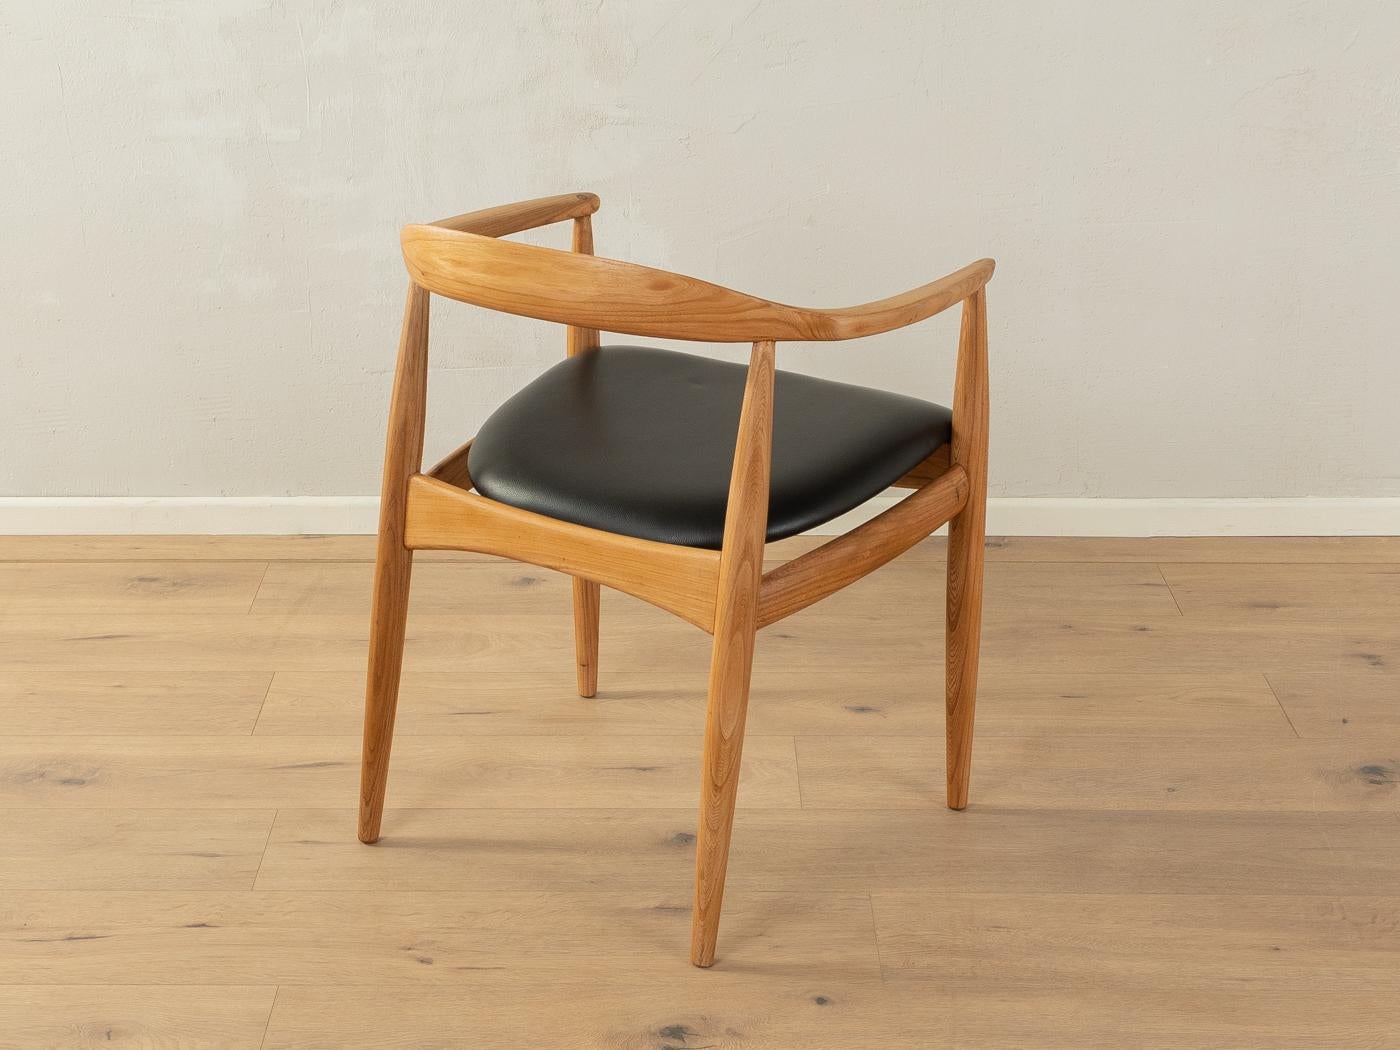 Classic Armchair by Illum Wikkelsø for Niels Eilersen, DK with an ash frame and the original leather cover in black.

Quality Features:
    accomplished design: perfect proportions and visible attention to detail
    high-quality workmanship using